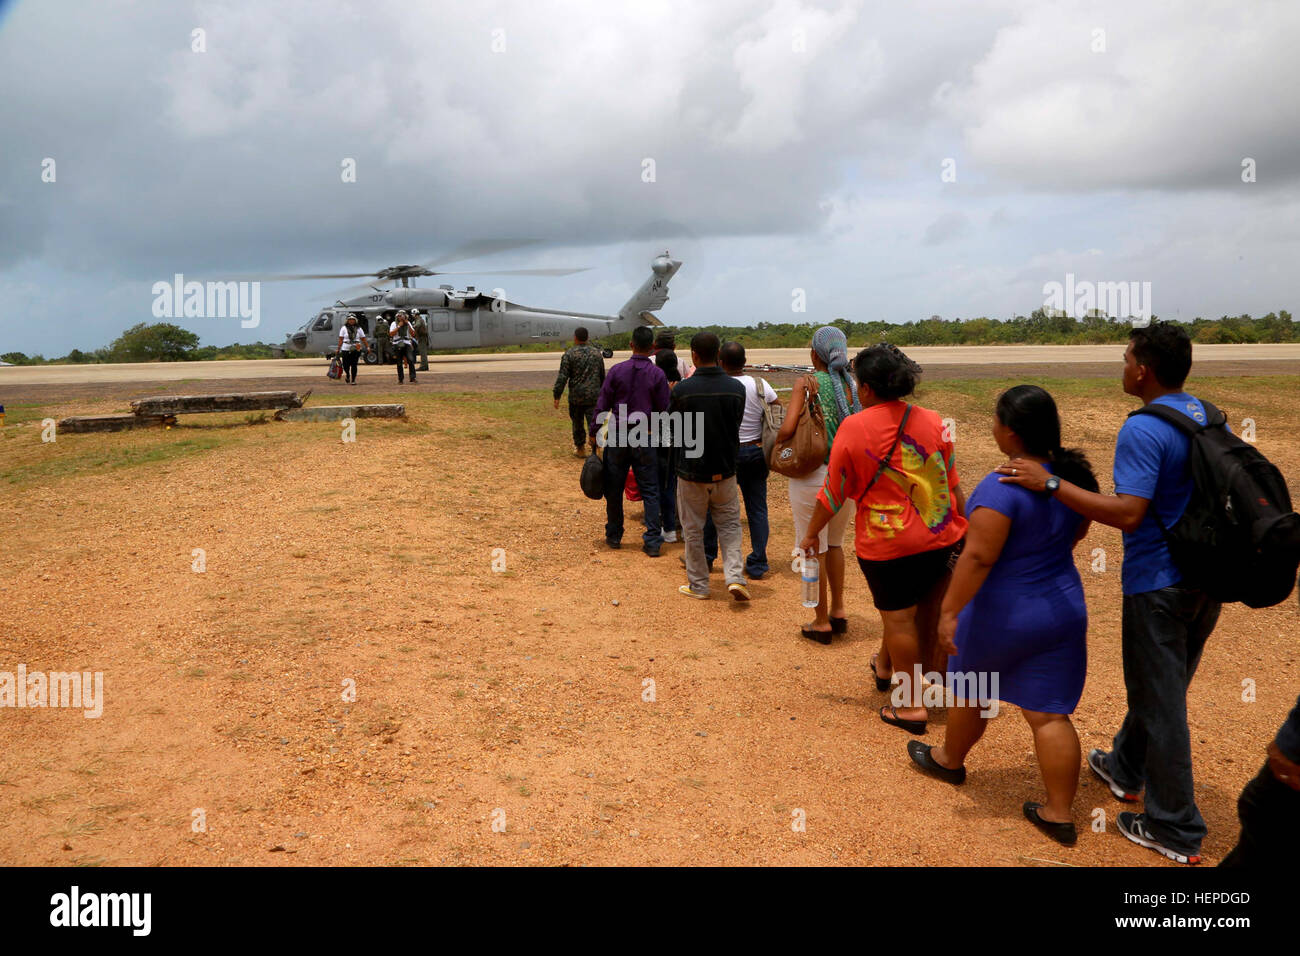 150522-A-BK746-184 PUERTO CABEZAS, Nicaragua (May 22, 2015) Nicaraguan citizens wait to board an MH-60s Sea Hawk helicopter assigned to Helicopter Sea Combat Squadron (HSC) 22 Sea Knights,  during Continuing Promise 2015. Continuing Promise is a U.S. Southern Command-sponsored and U.S. Naval Forces Southern Command/U.S. 4th Fleet-conducted deployment to conduct civil-military operations including humanitarian-civil assistance, subject matter expert exchanges, medical, dental, veterinary and engineering support and disaster response to partner nations and to show U.S. support and commitment to  Stock Photo